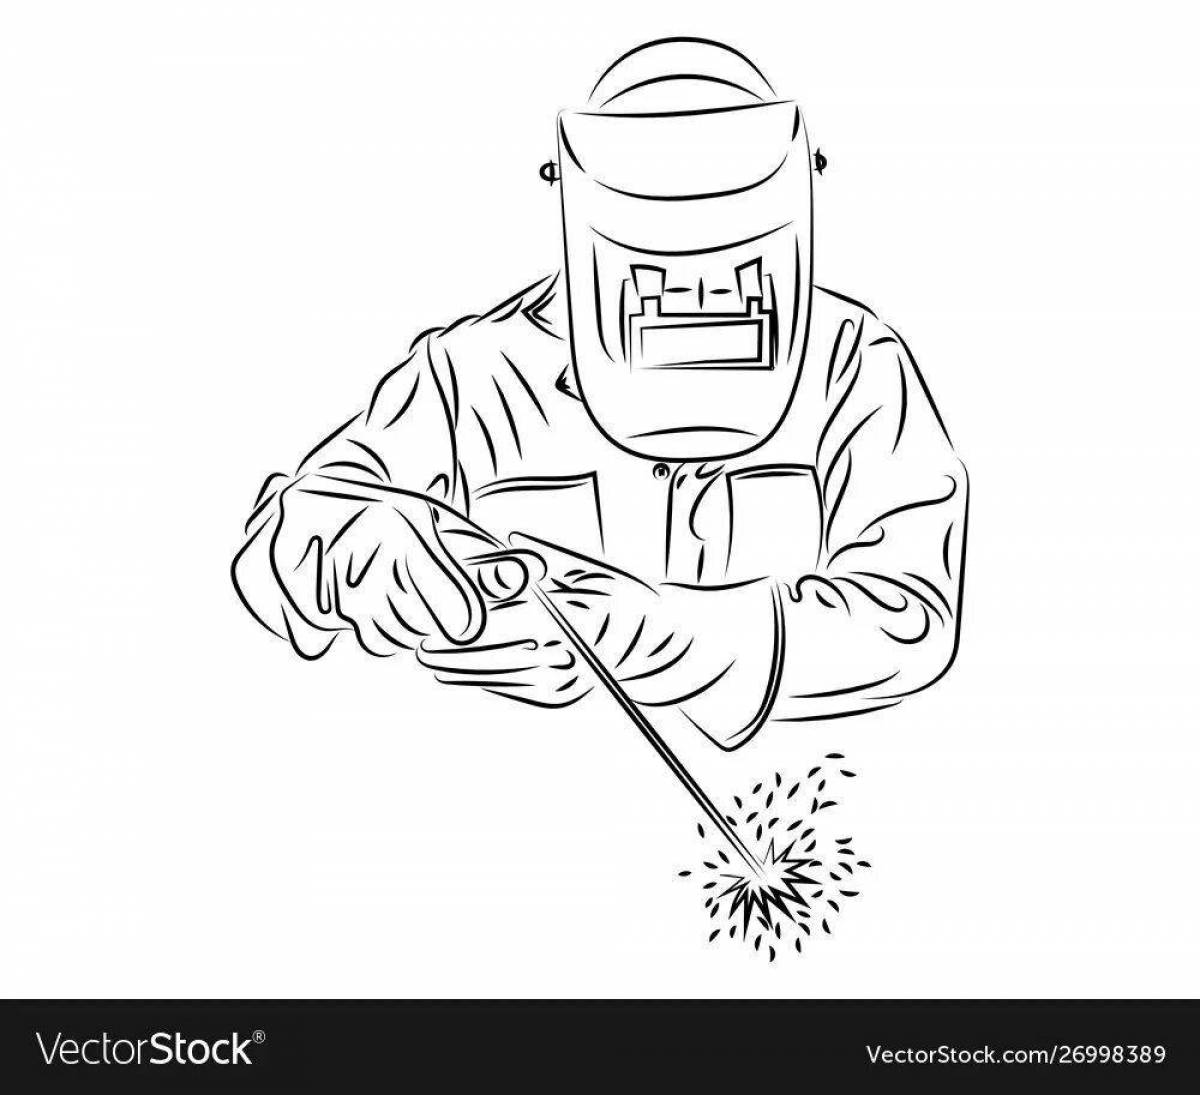 Welder bright coloring page